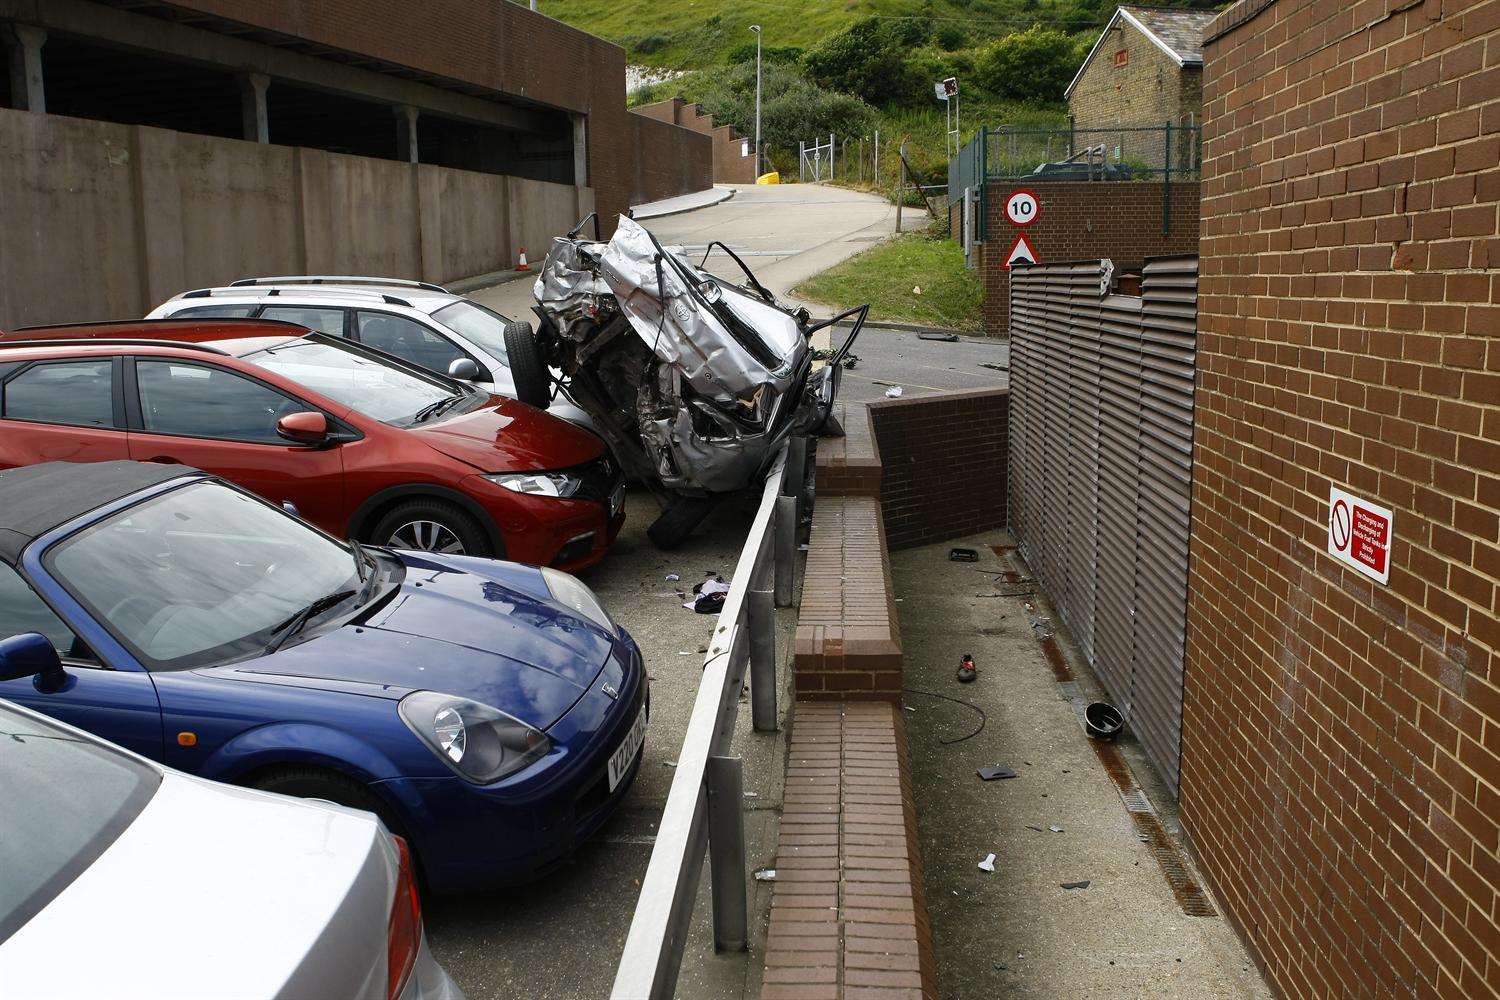 A Toyota Corolla somersaulted from the A20 roundabout into the multi-storey car park.